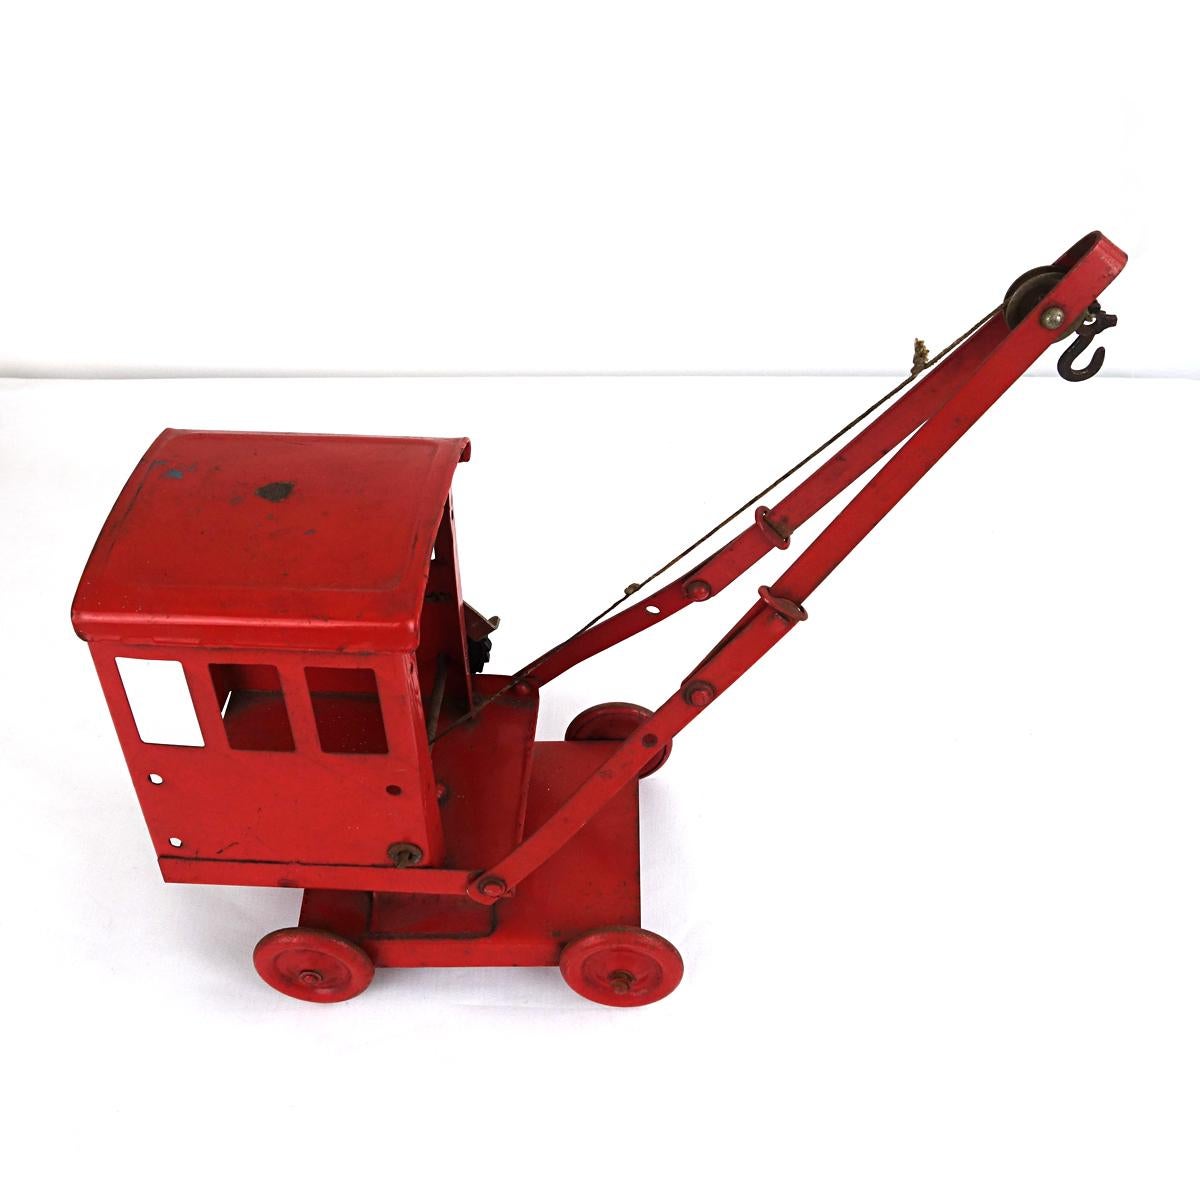 Steel toy crane with lots of appeal. It is plain and pretty, sitting on four wheels. The hook really works well.